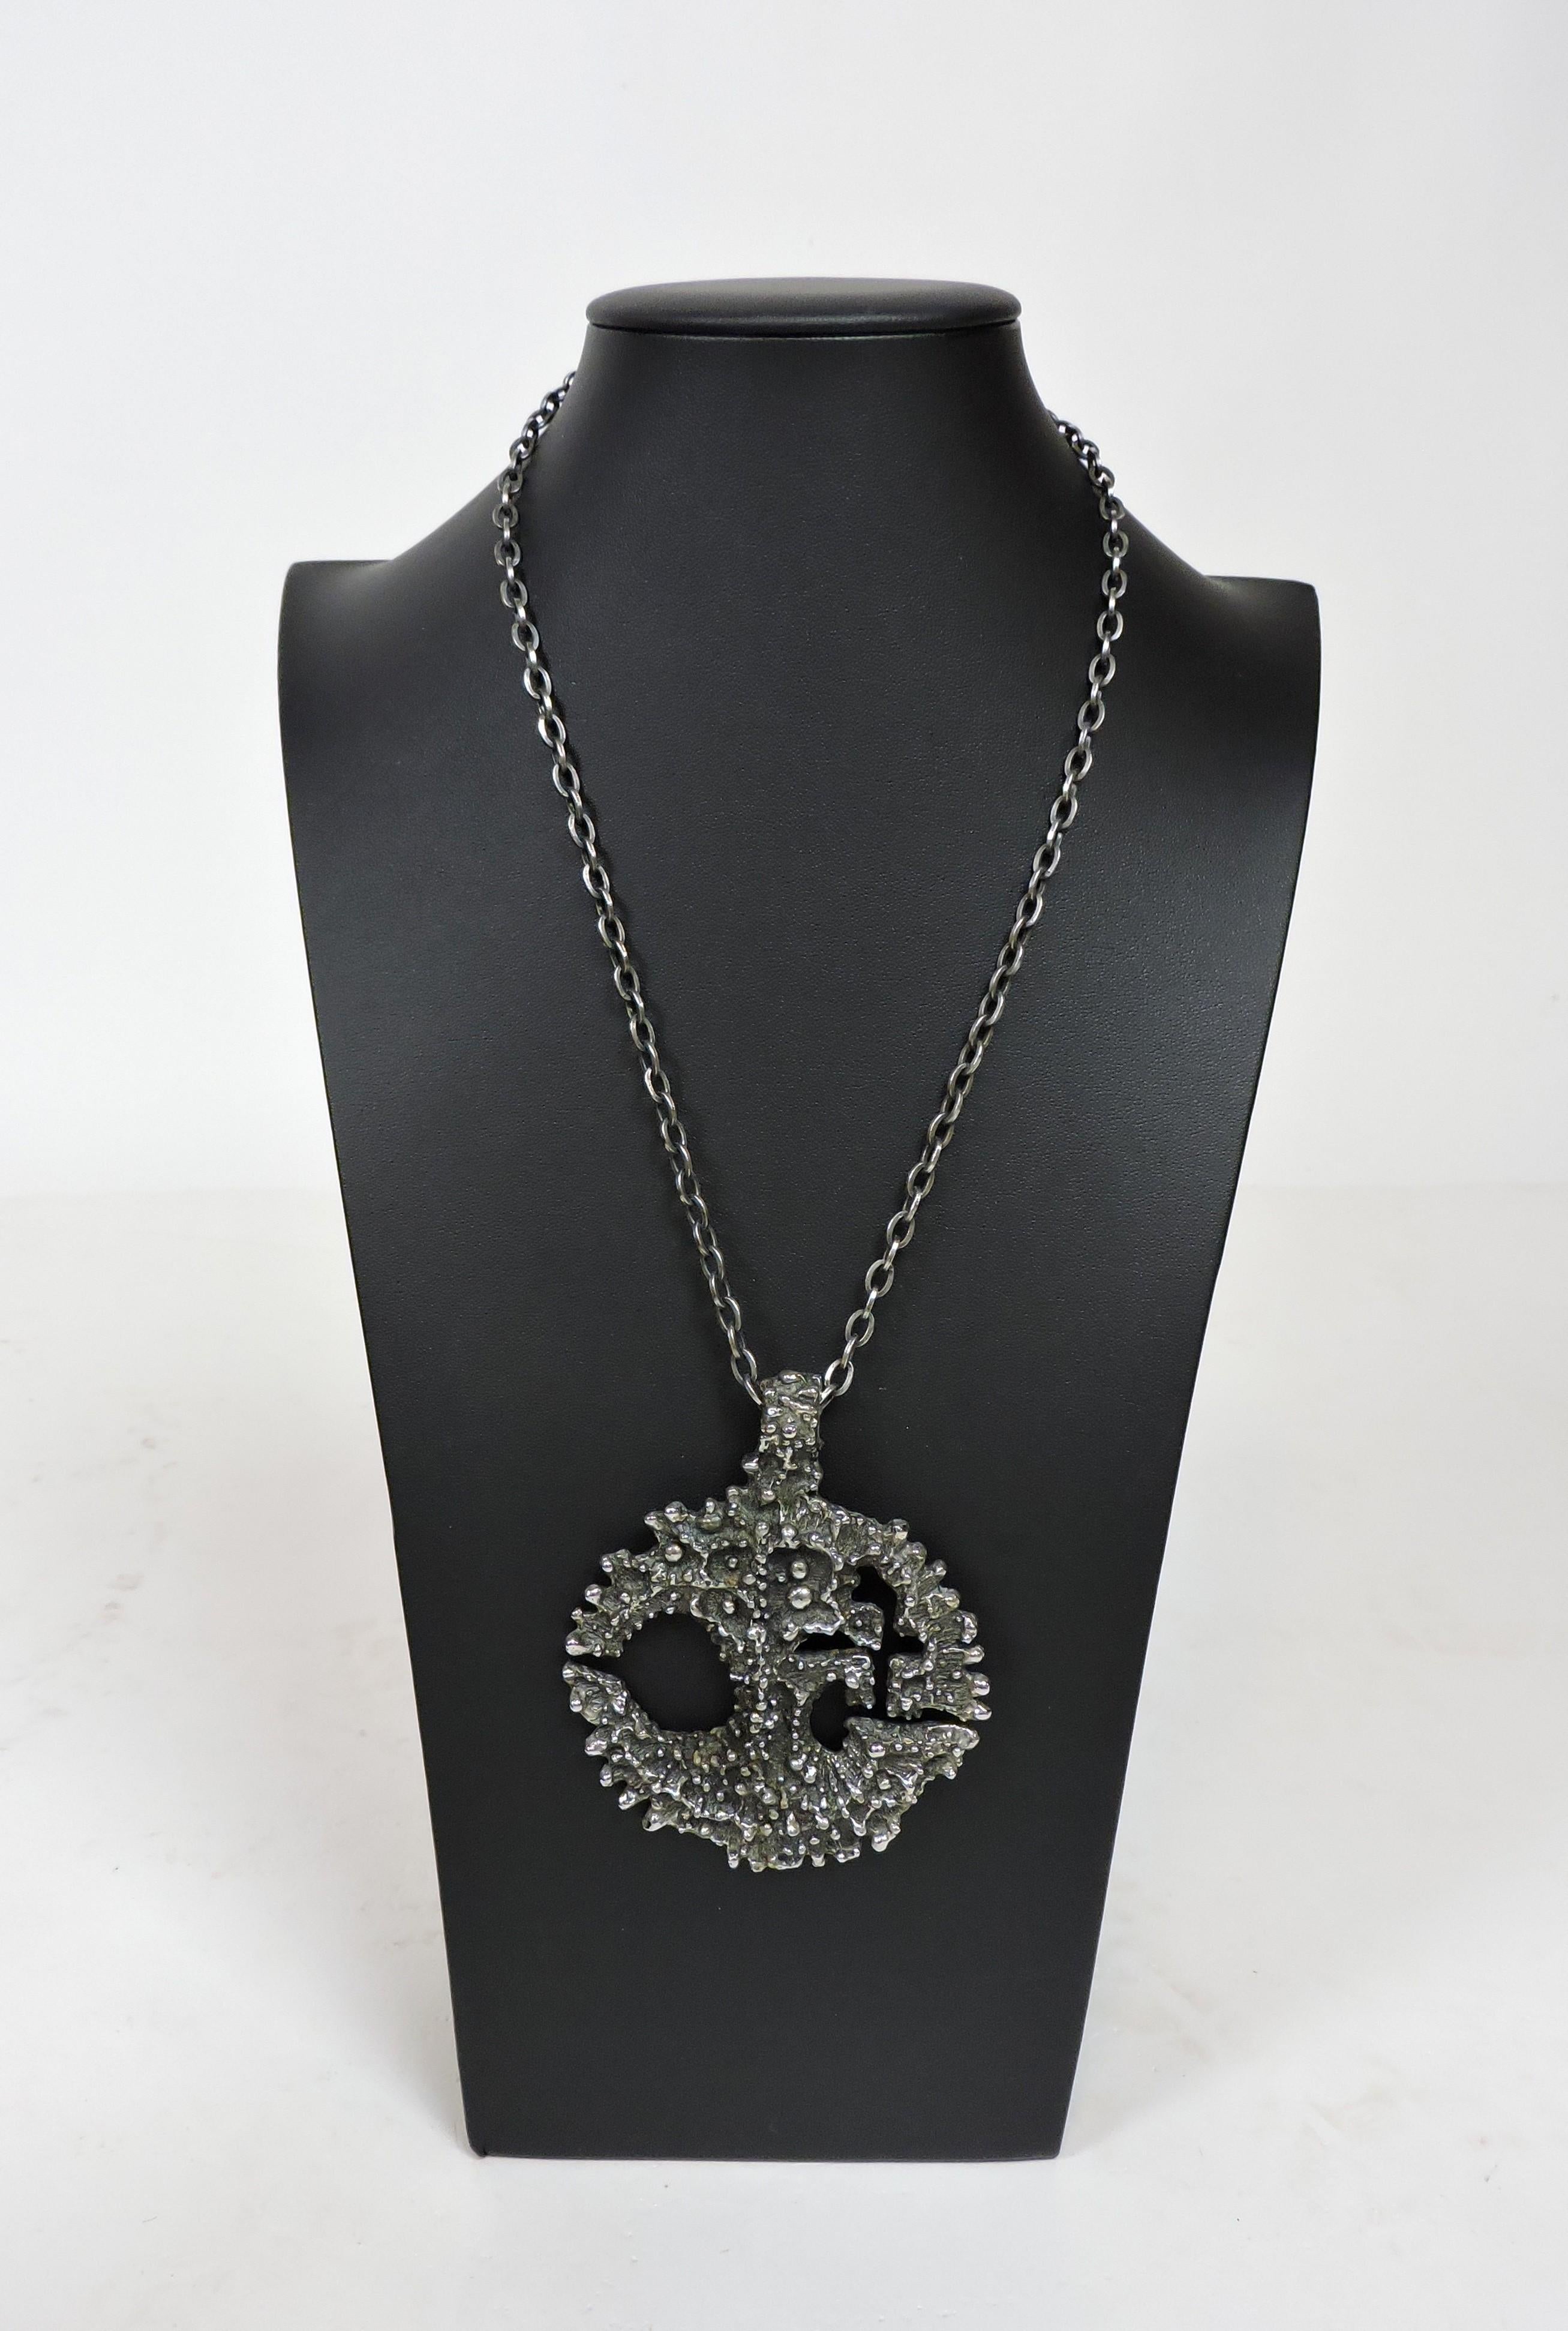 Striking large and dramatic sculptural brutalist style pendant necklace by acclaimed Canadian jewelry artist, Robert Larin. Made of hand cast pewter and signed R. Larin on the back, this also has the original chain. The pendant size is 2.75 inches